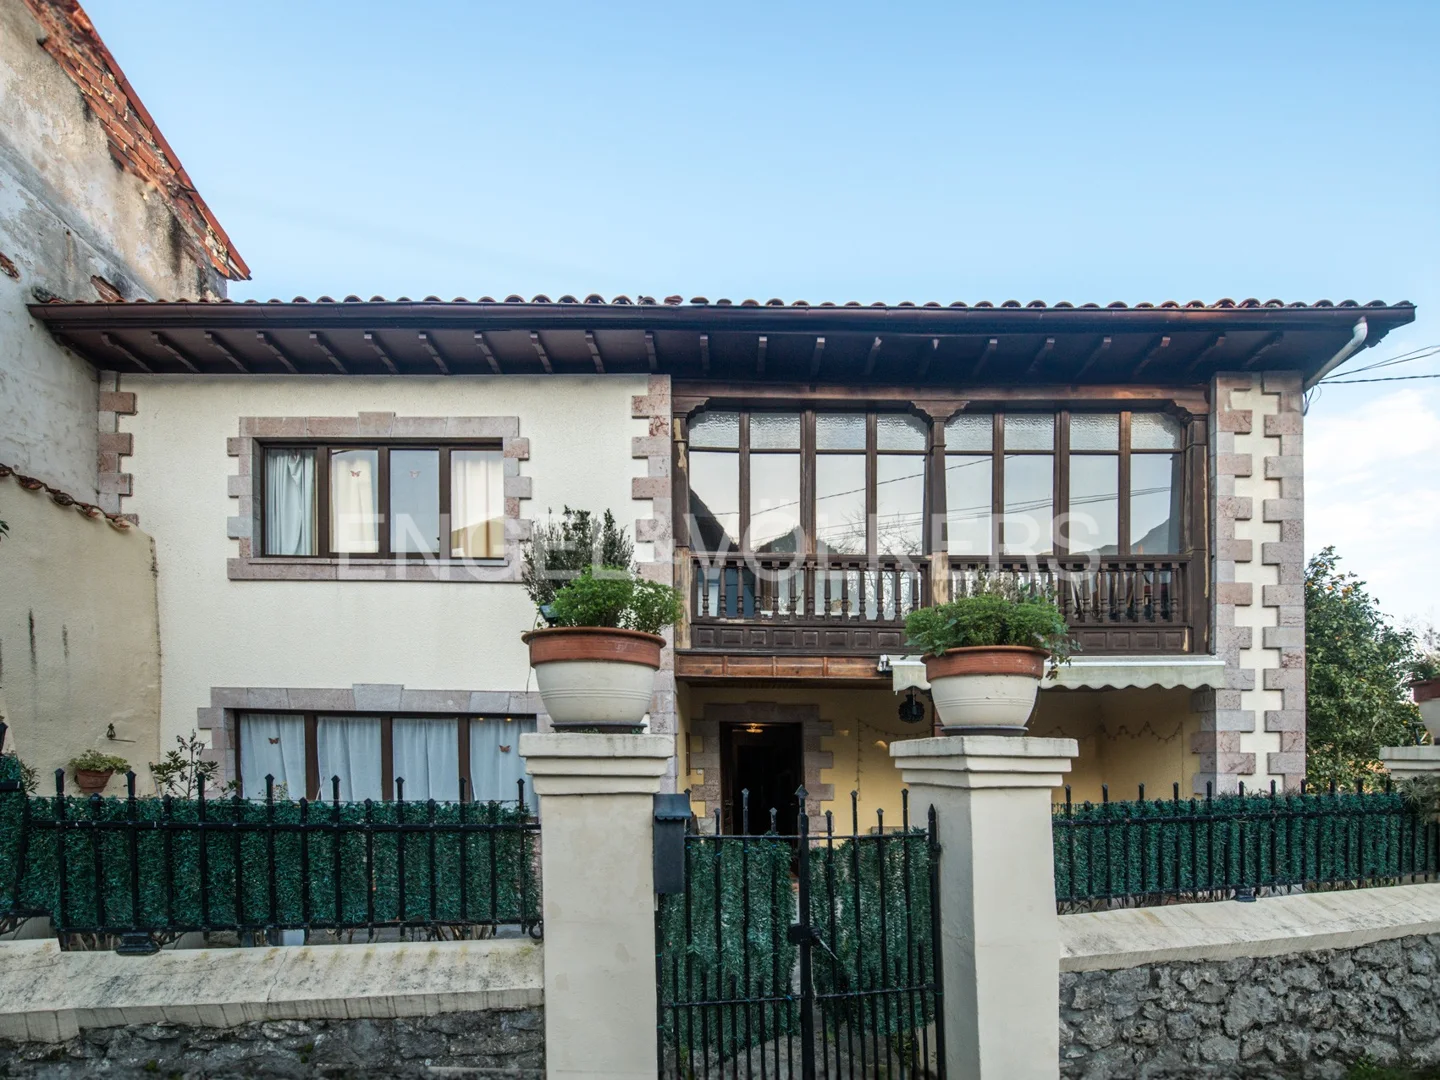 Asturian stone mansion and corridor in residential area